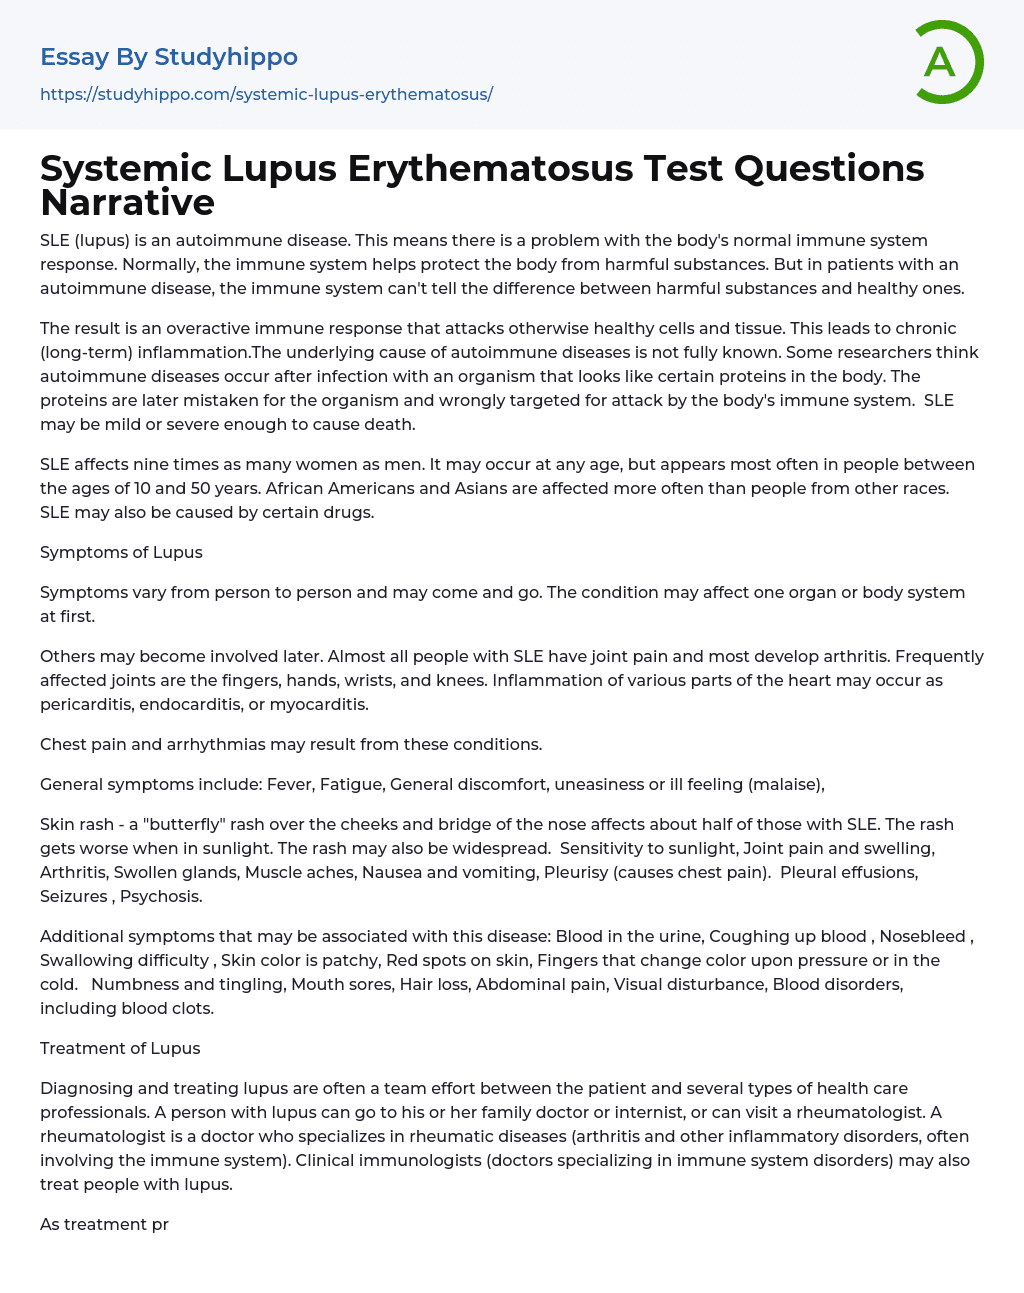 Systemic Lupus Erythematosus Test Questions Narrative Essay Example